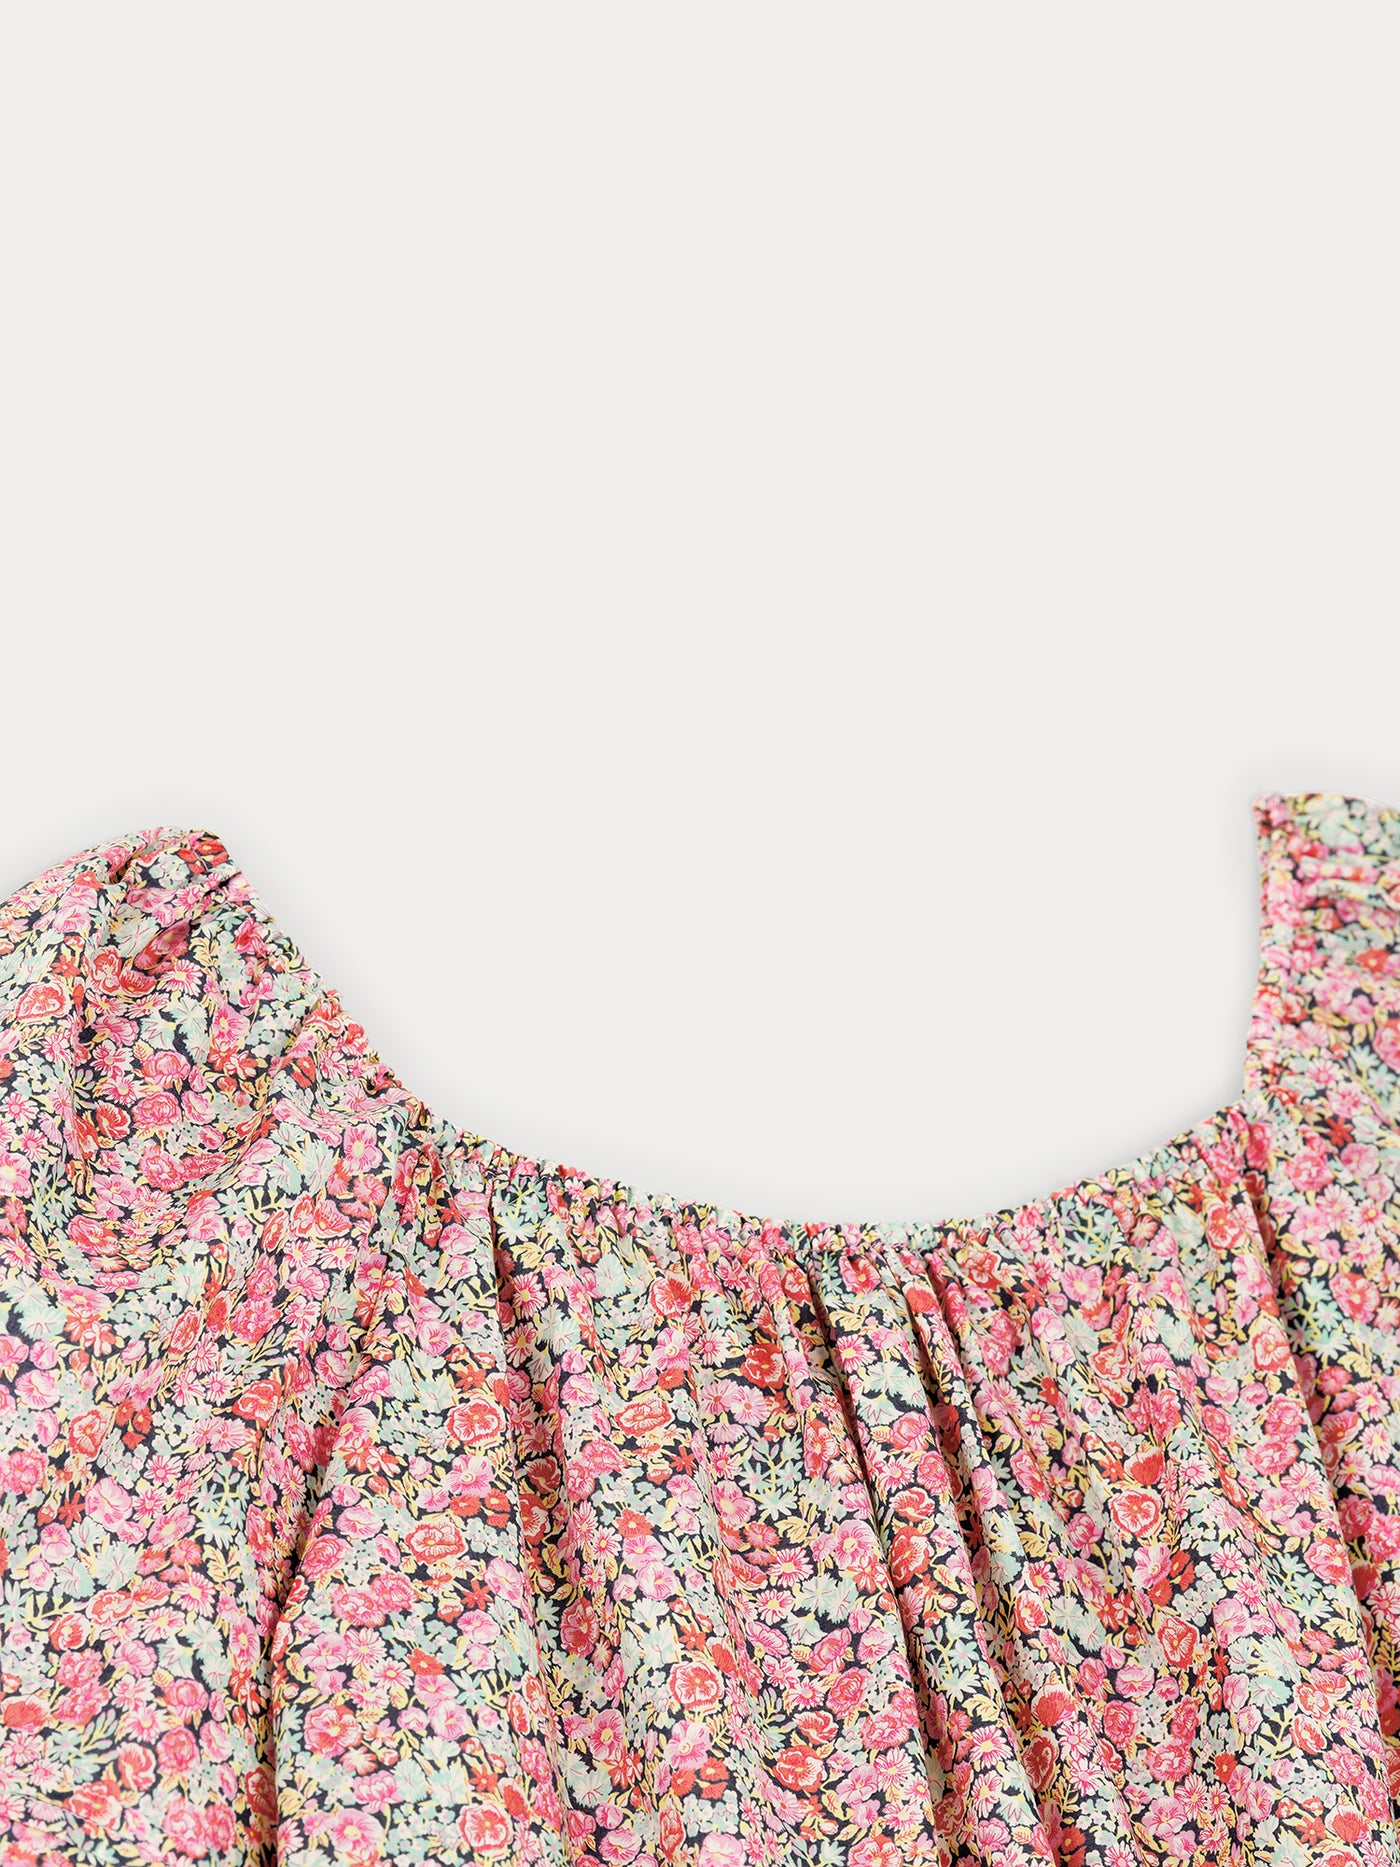 Blouse in exclusive floral Liberty fabric with short flared sleeves